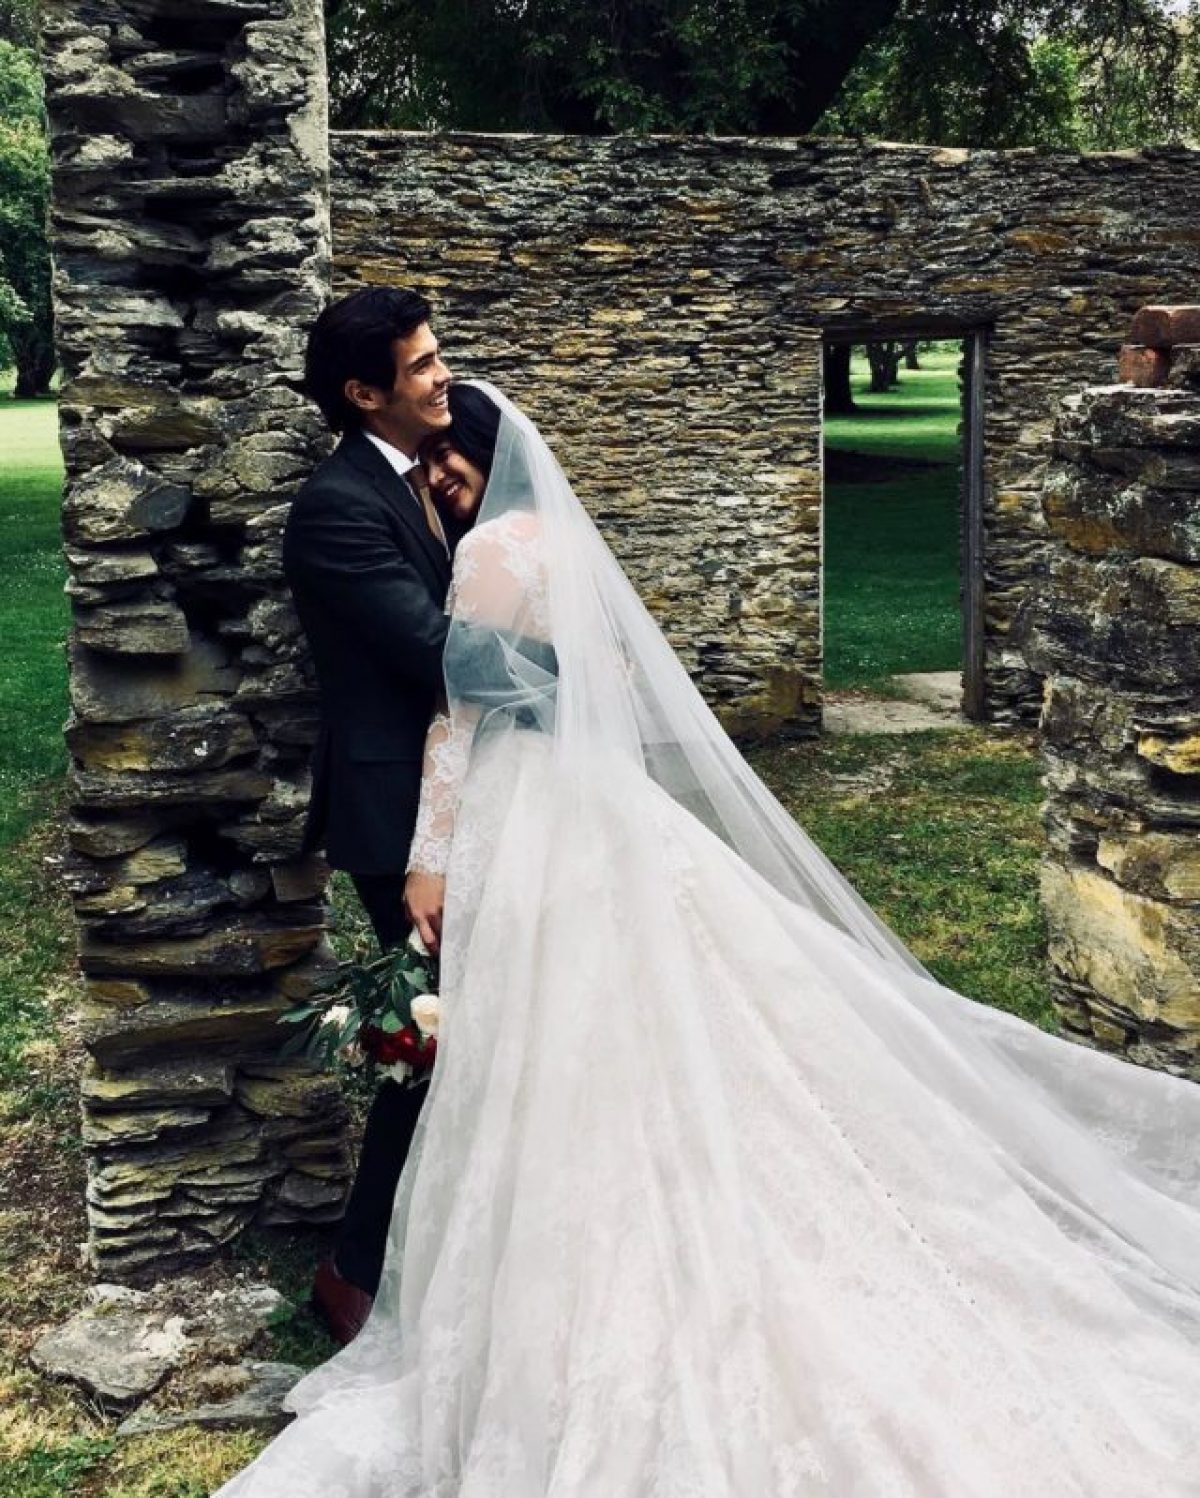 The 6 Times Anne Curtis And Erwan Heussaff Looked Like The Perfect